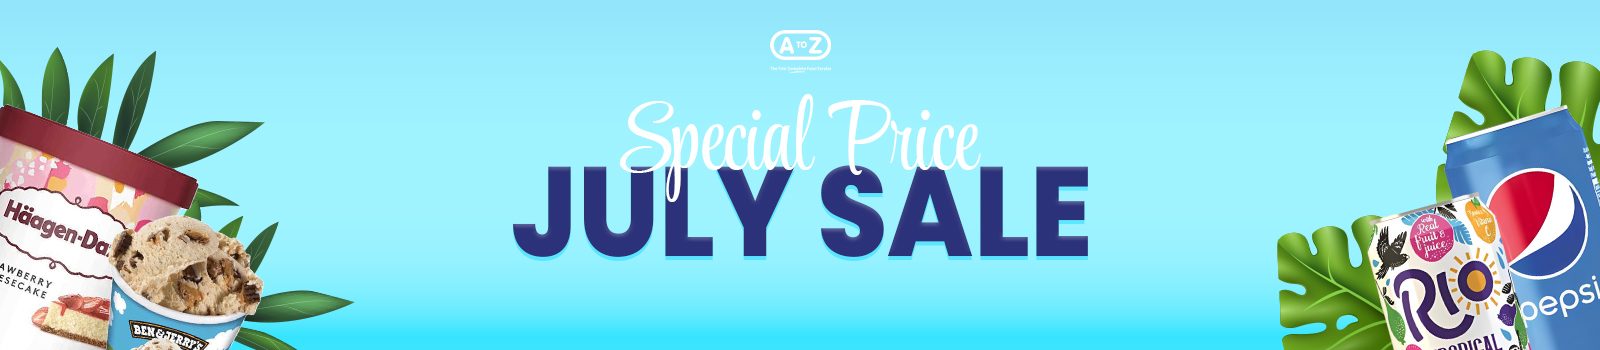 July Promotions